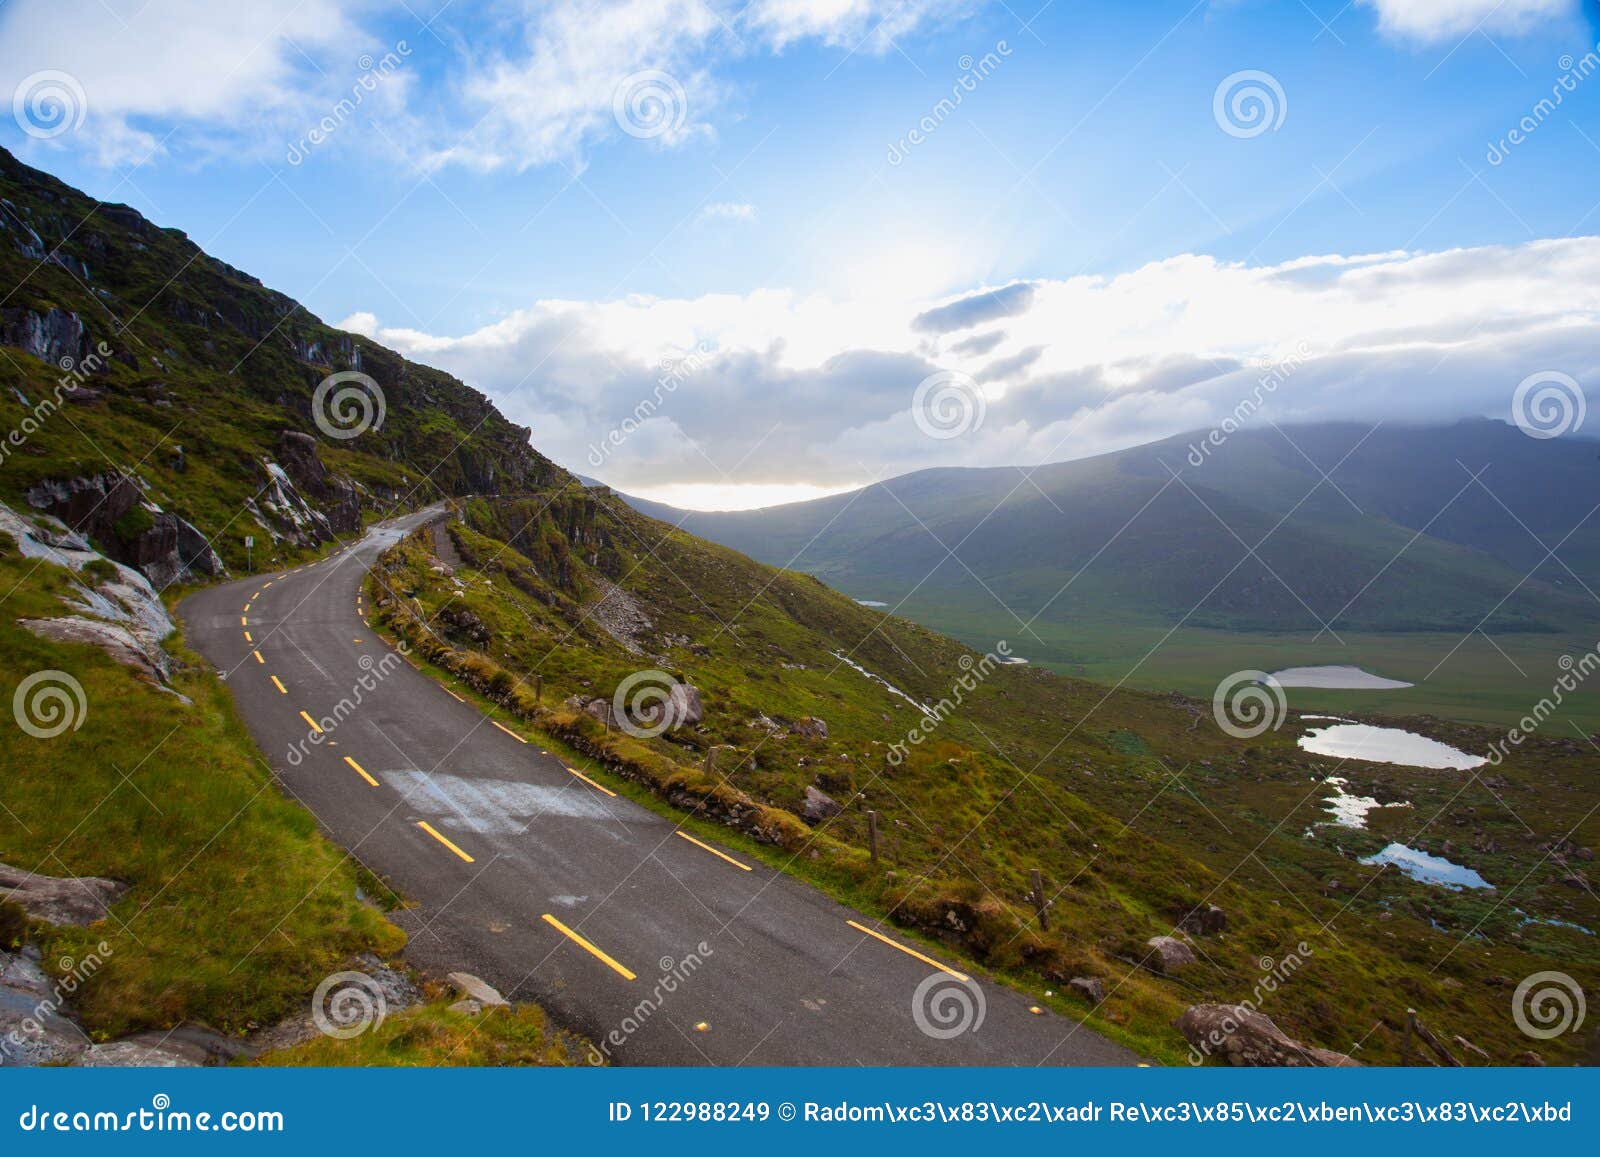 the conor pass is the highest mountain pass in ireland.